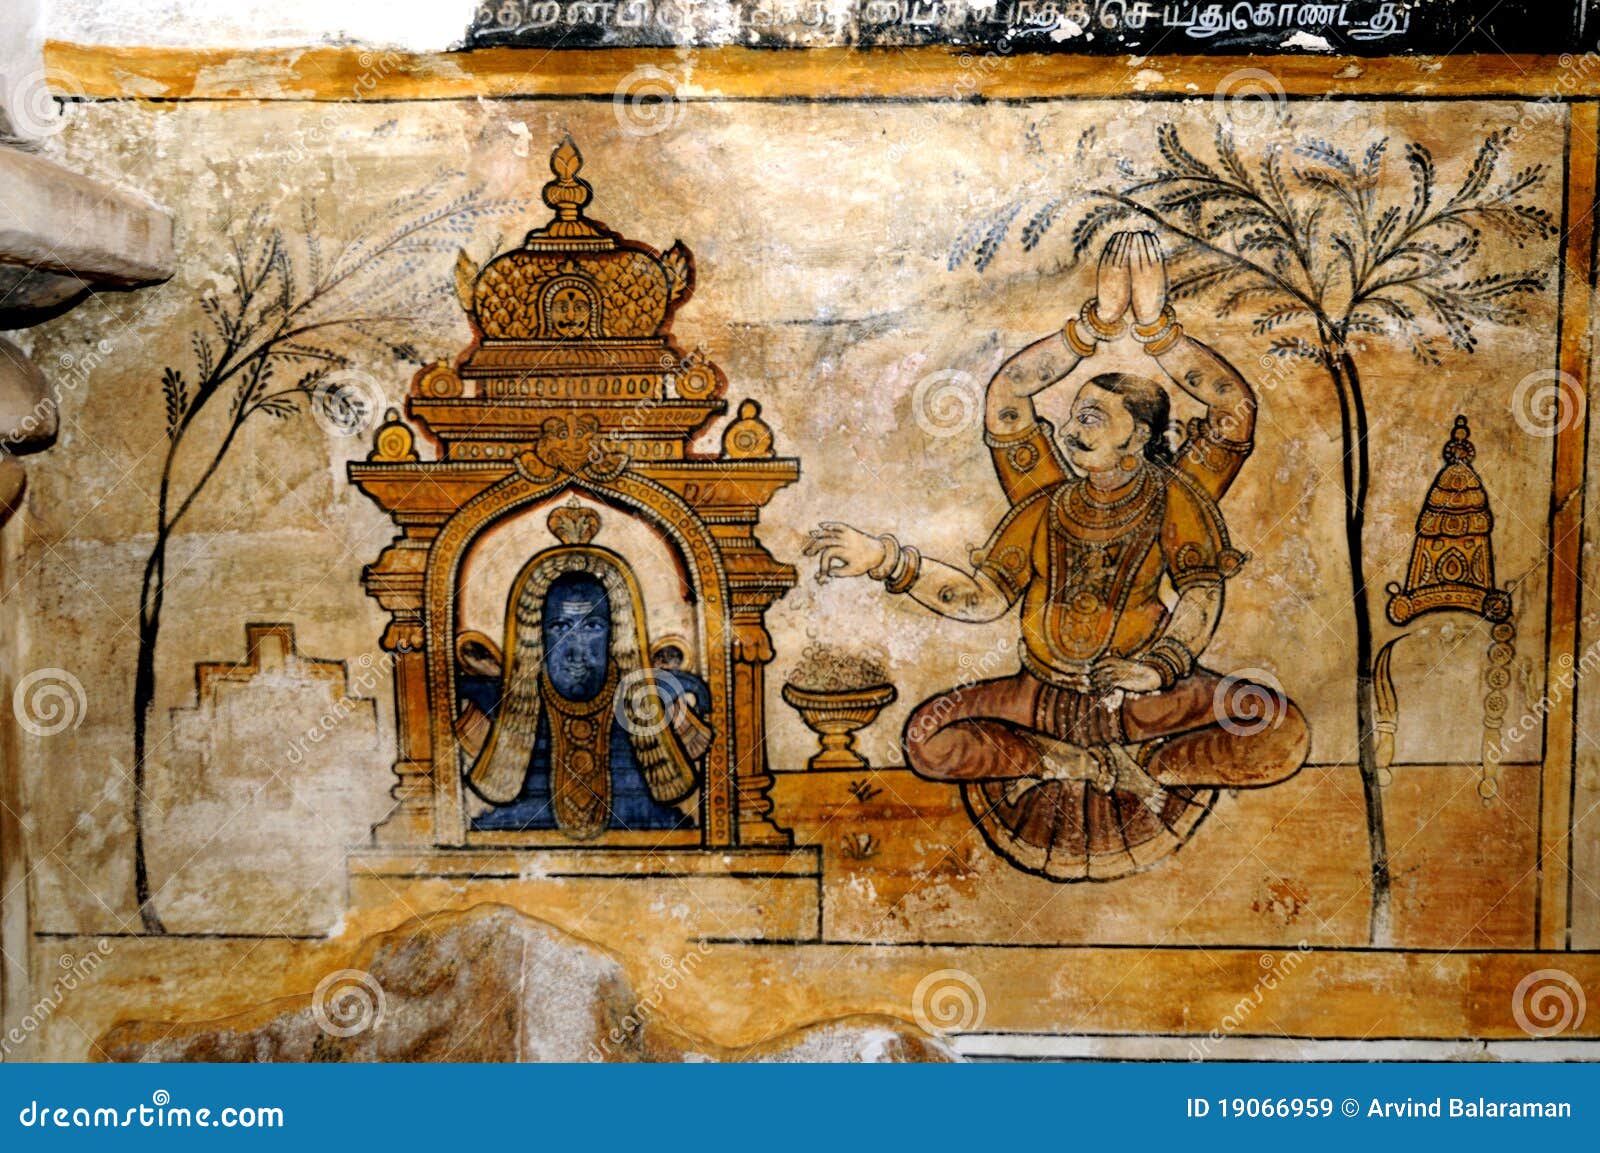 Beautiful and colorful fresco paintings in temple wall